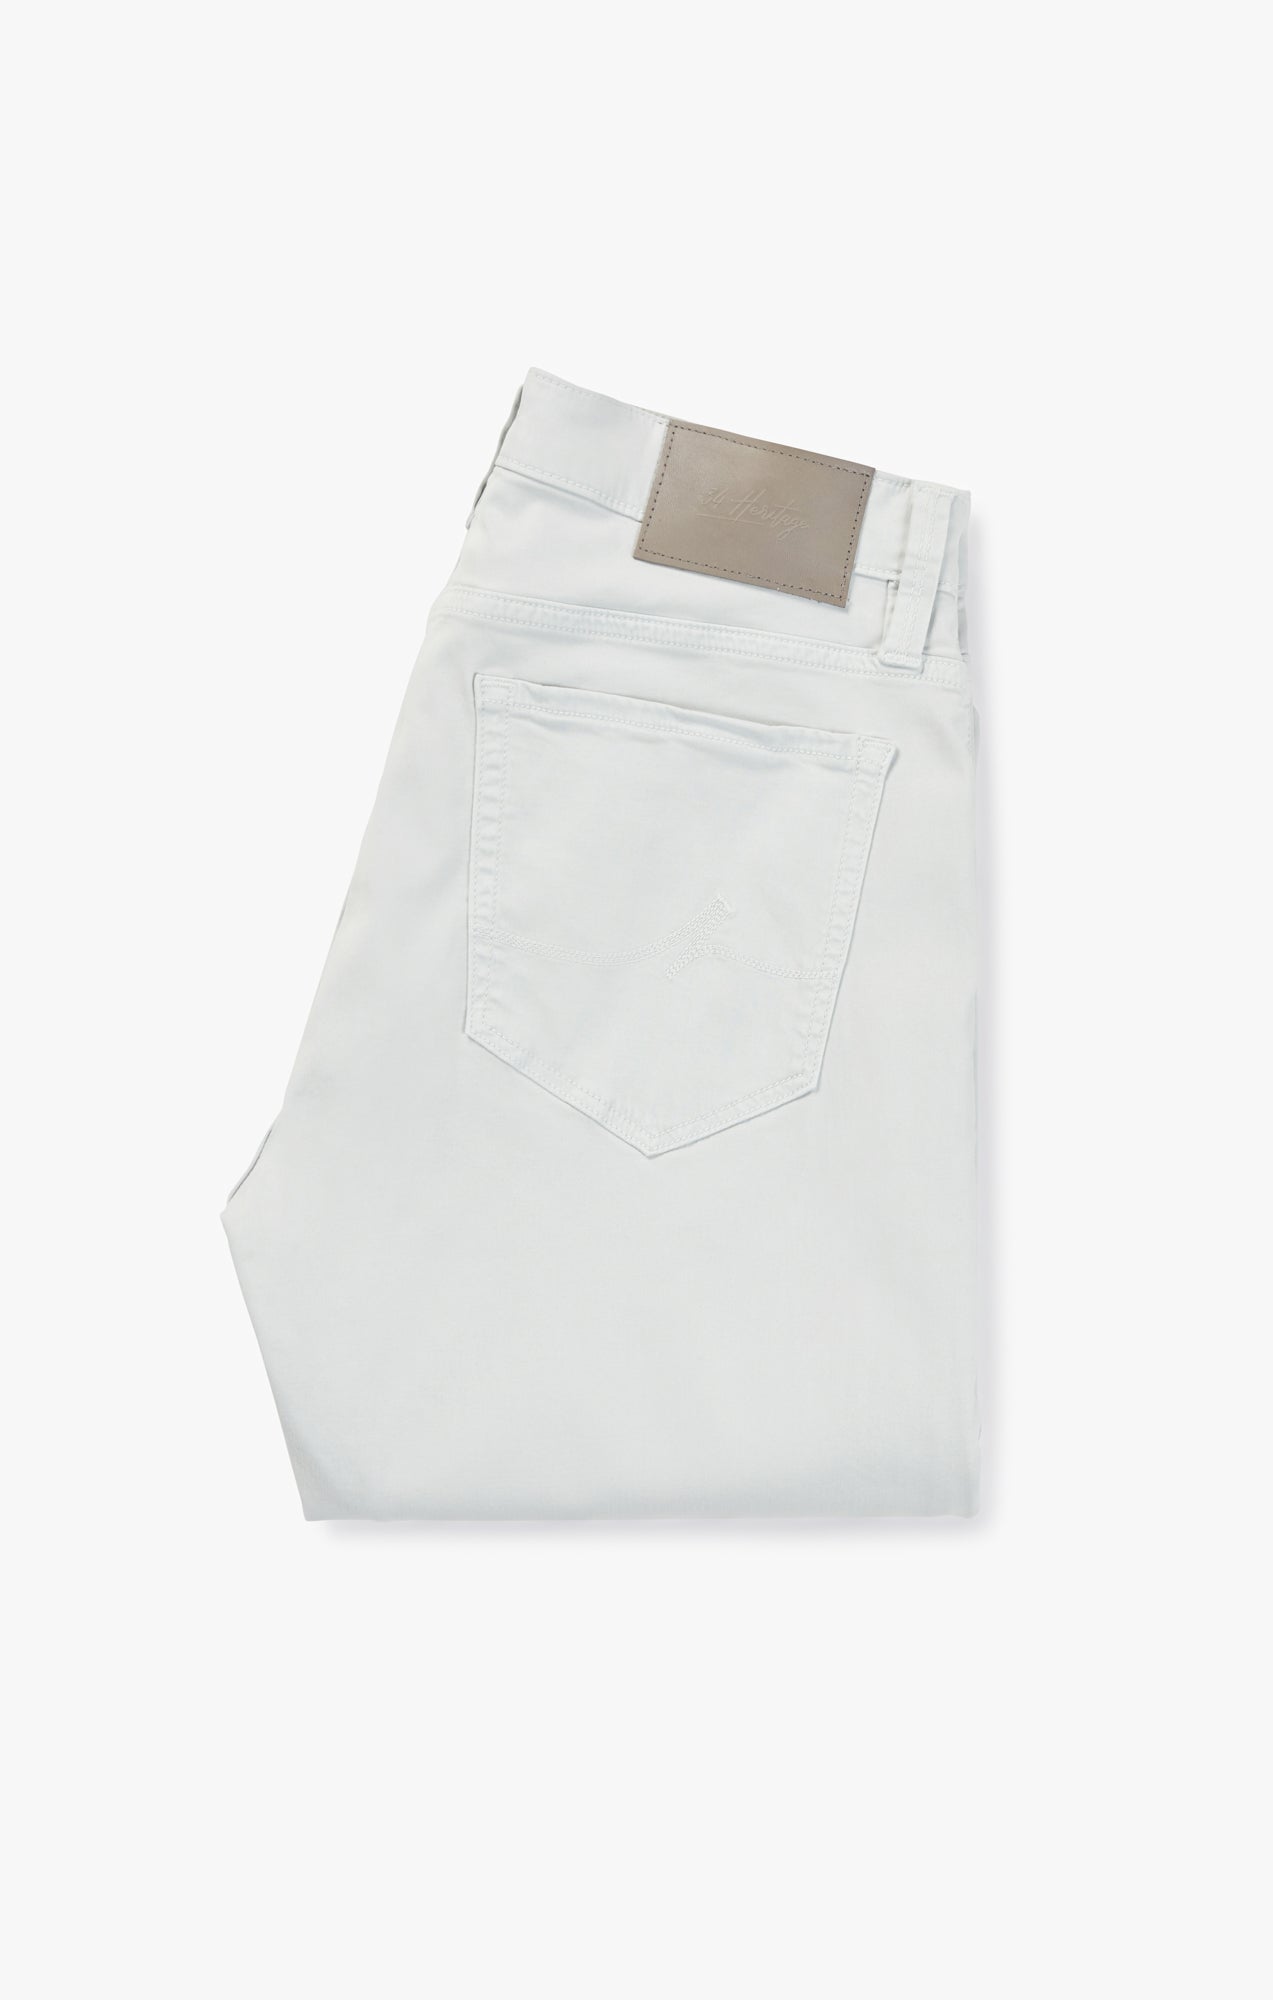 Courage Straight Leg Pants In Stone Twill Image 8